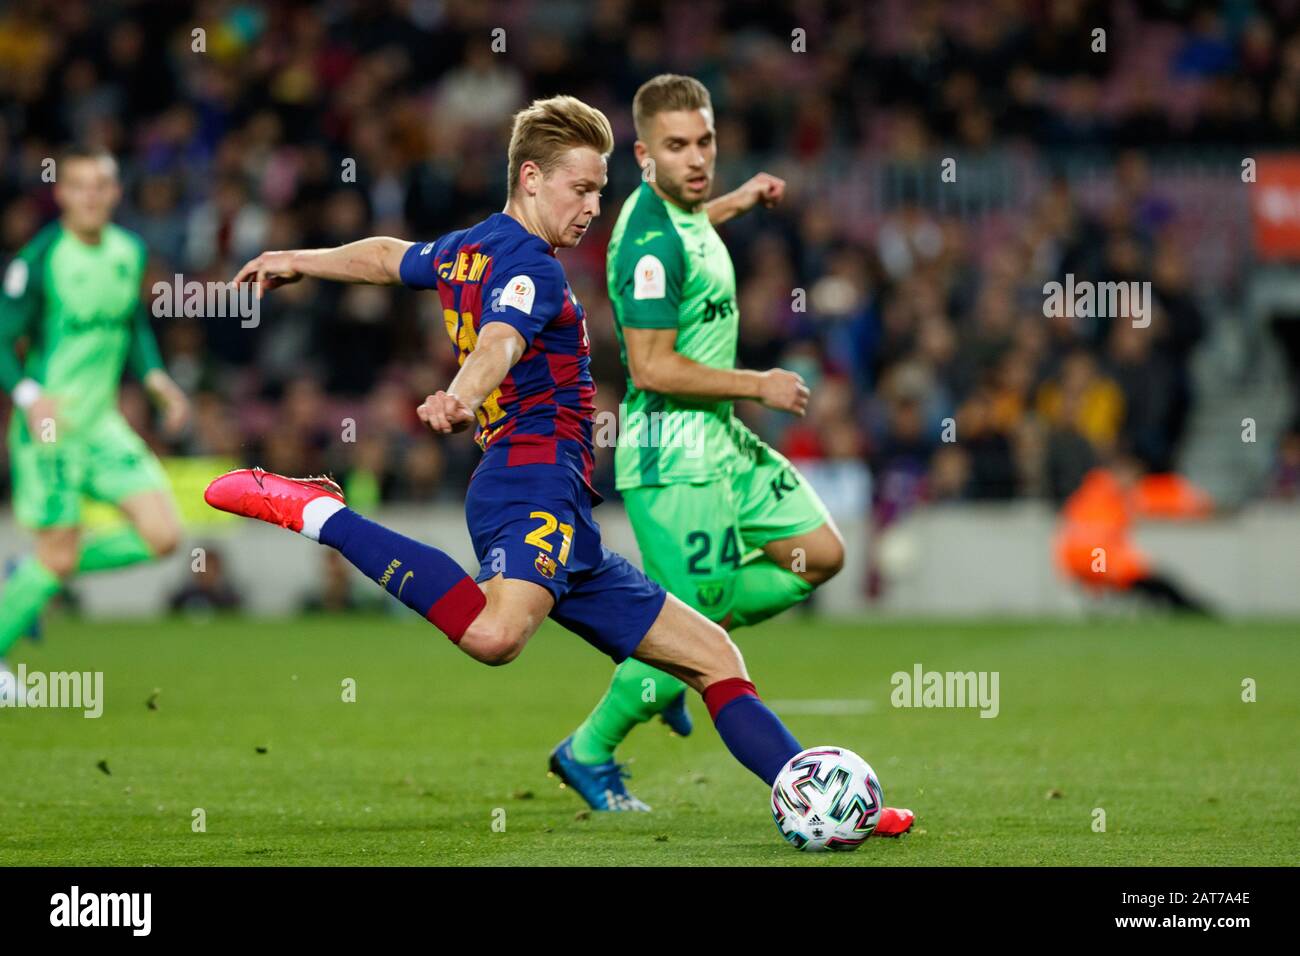 BARCELONA, SPAIN - JANUARY 30:.Frenkie de Jong of FC Barcelona during the Spanish Copa del Rey Round of 16 match between FC Barcelona and SD Leganes at Camp Nou on January 30, 2020 in Barcelona, Spain. (Photo by DAX/ESPA-Images) Stock Photo